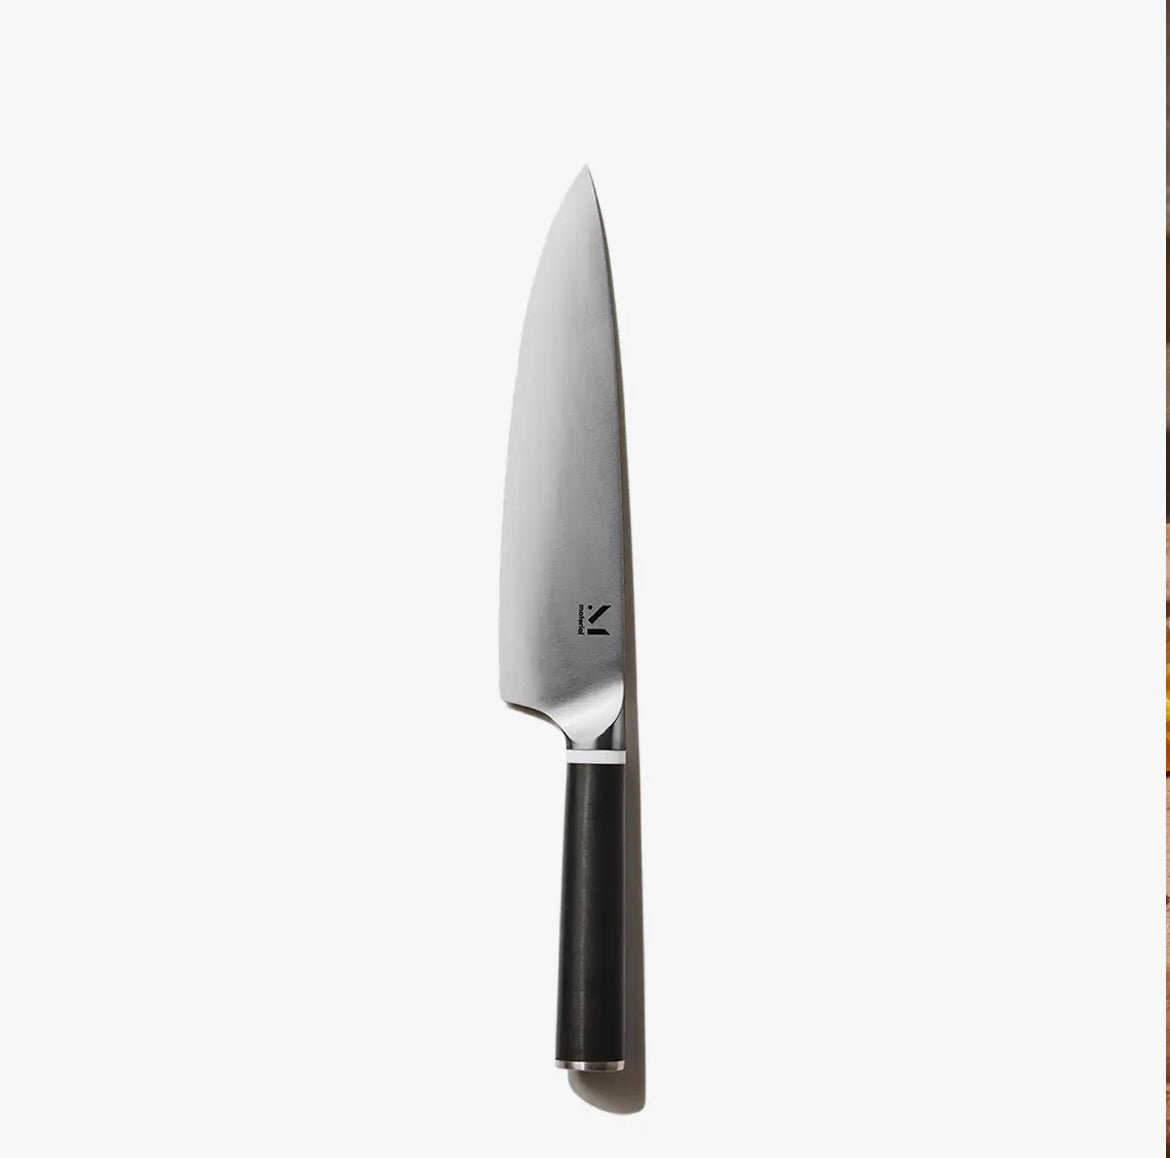 The 8" Knife - EcoLuxe Furnishings